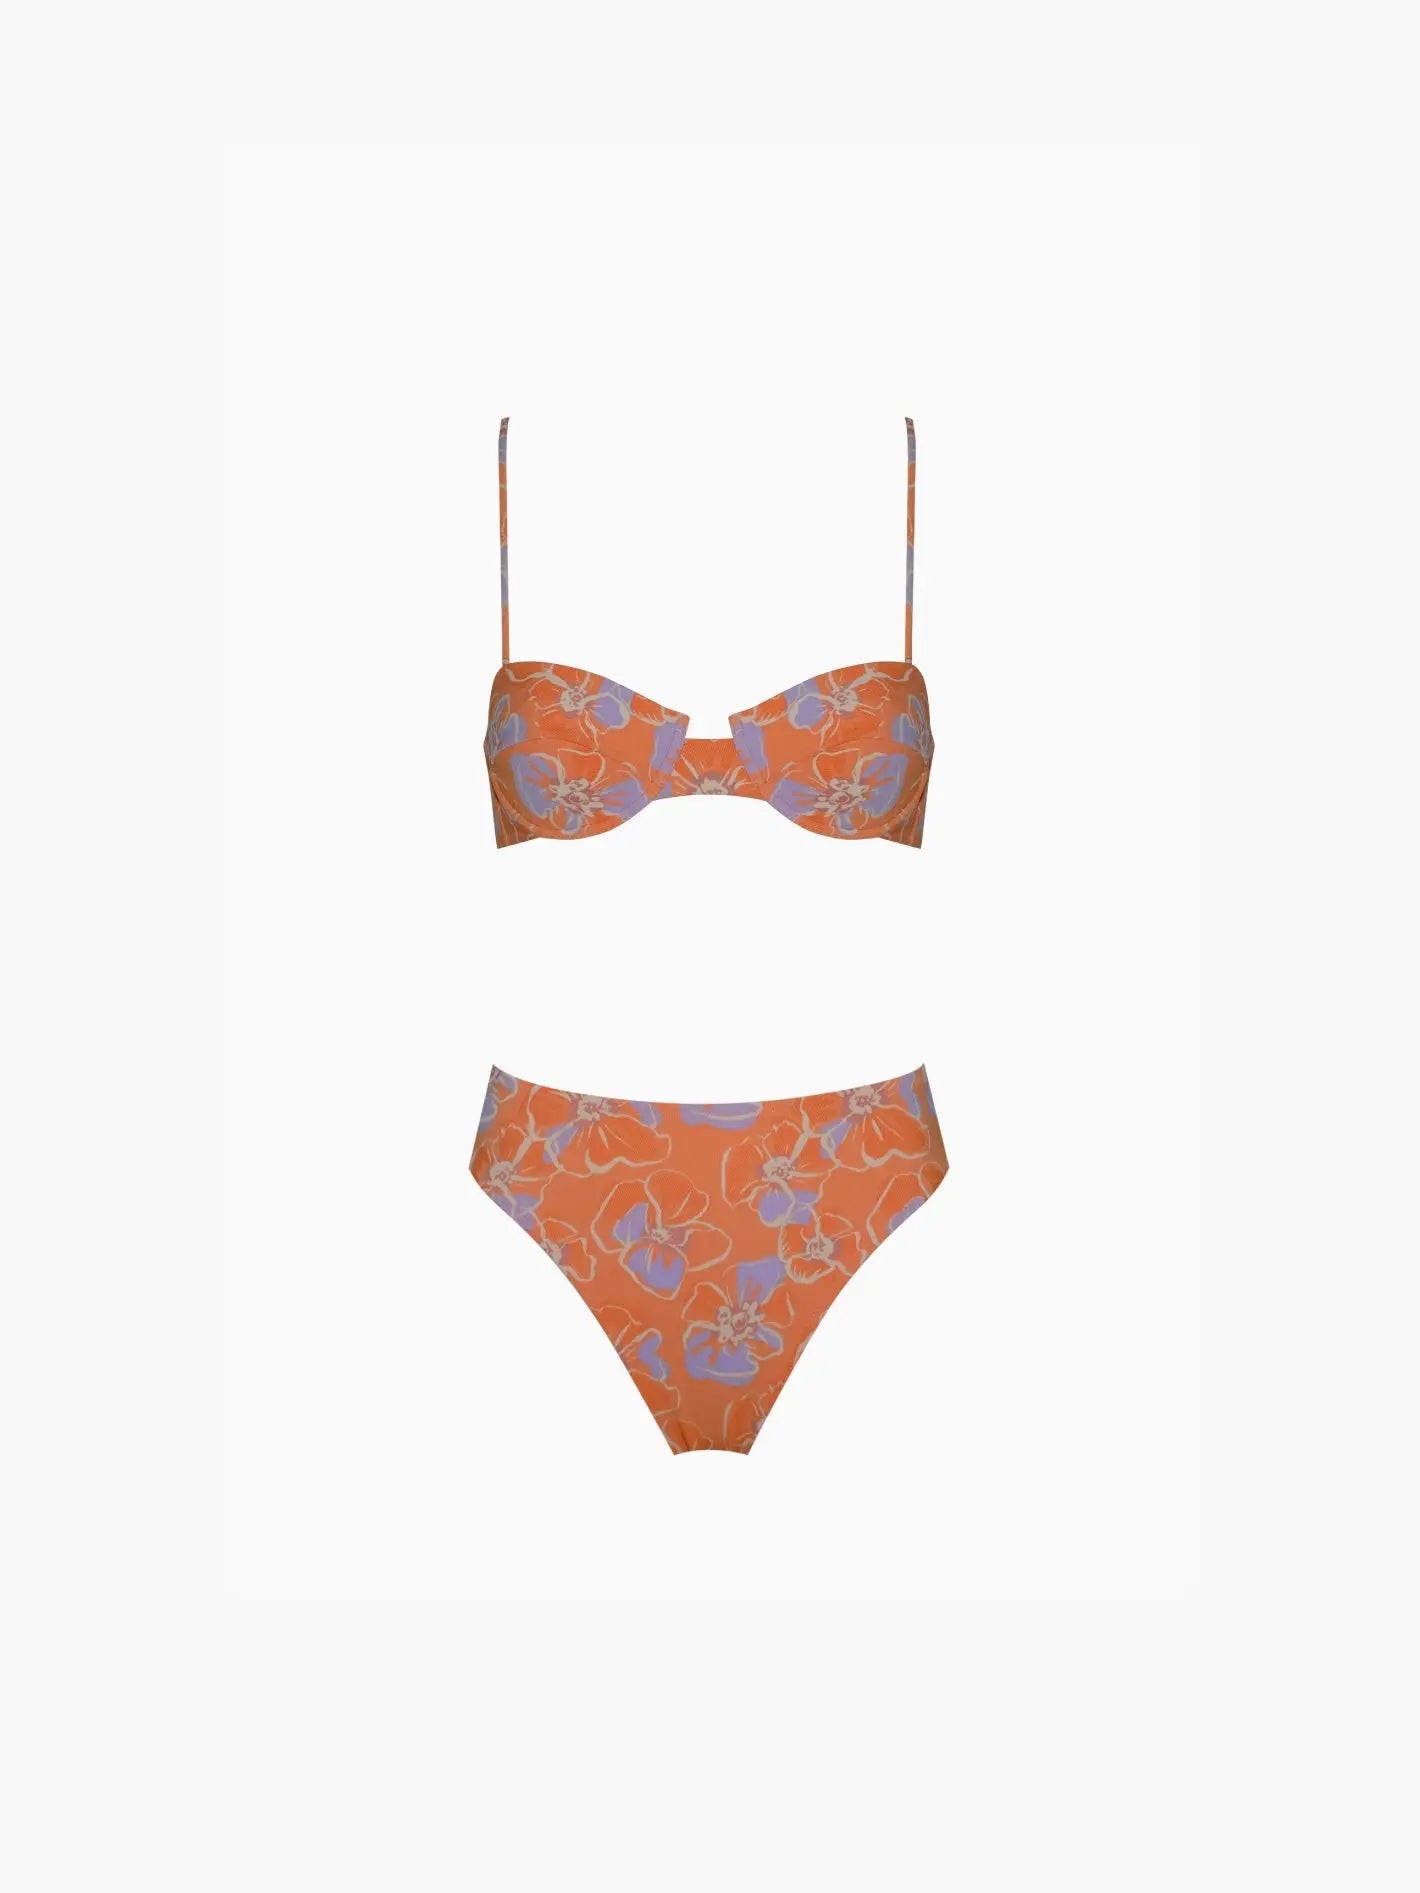 Cleo Bikini Mandarina by Pale, available at Bassalstore. The top features thin adjustable straps, and the bottom boasts a fashionable high-waisted cut.